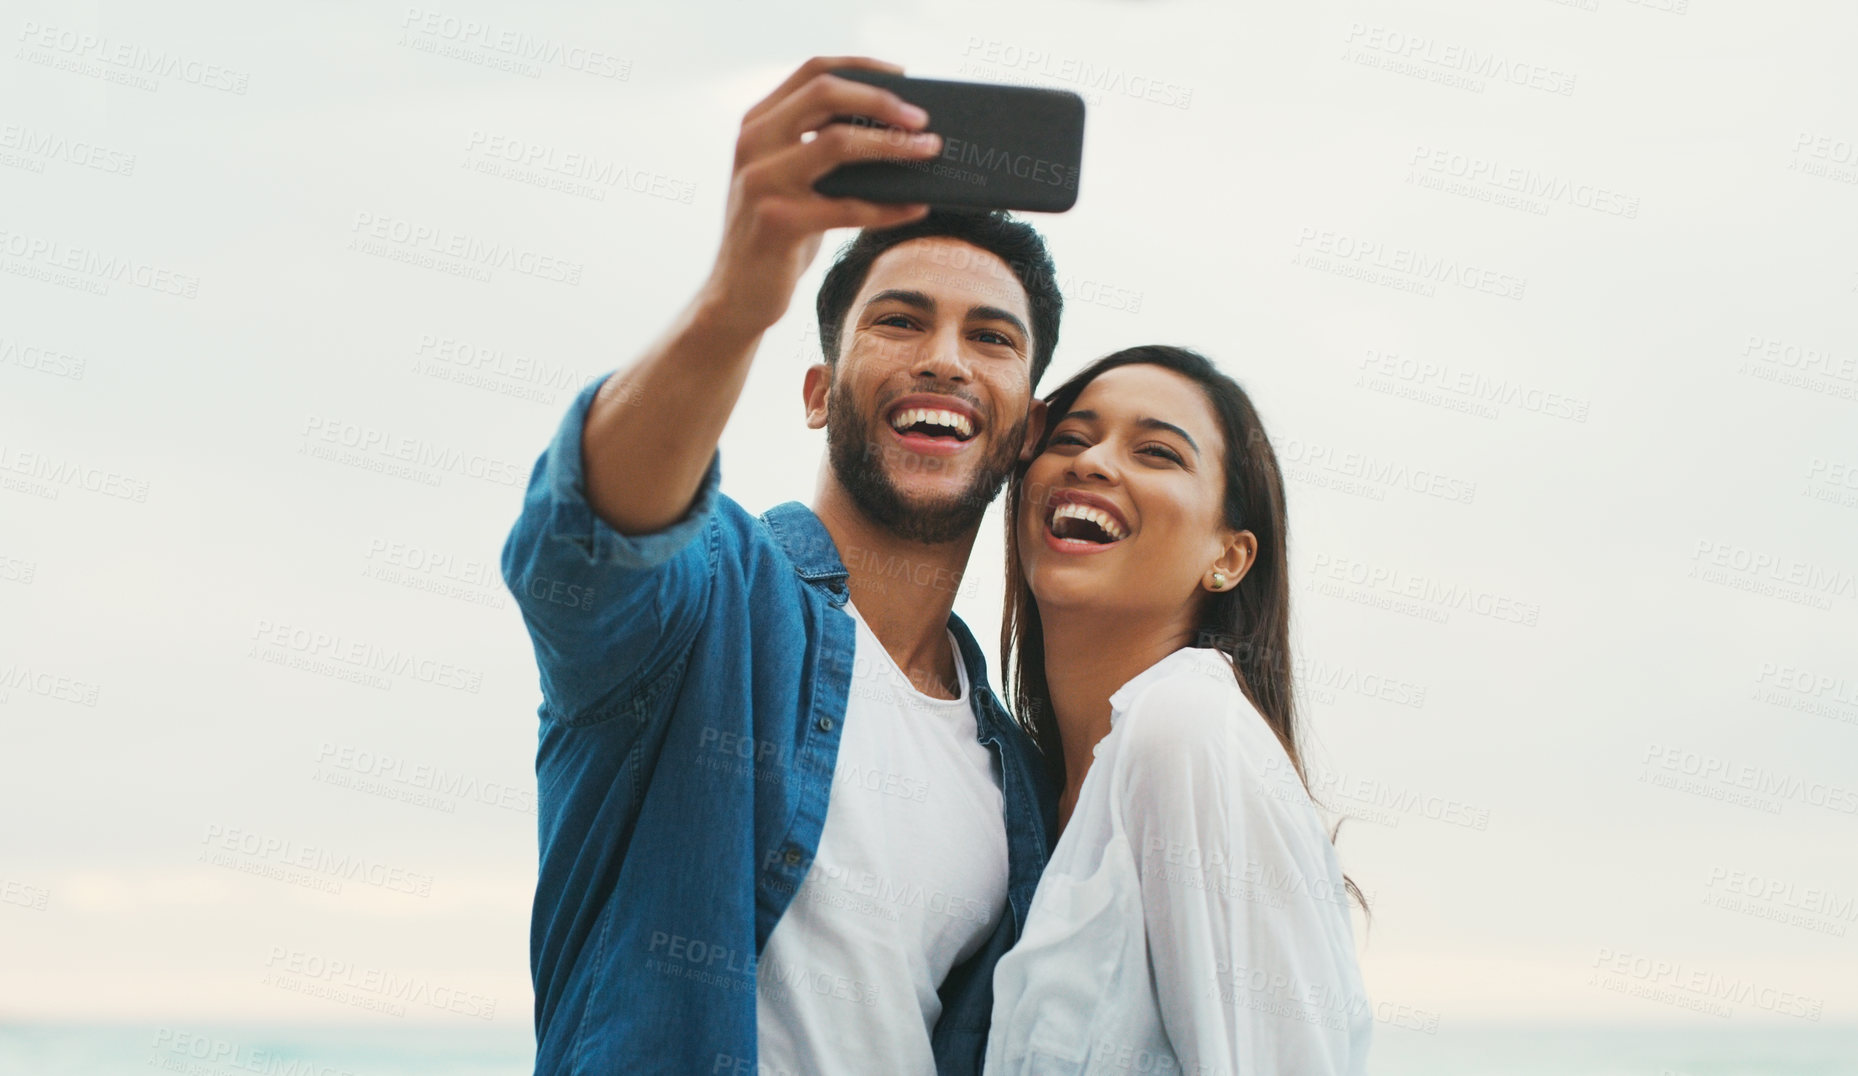 Buy stock photo Cropped shot of a happy young couple posing for a selfie while on the beach during the day